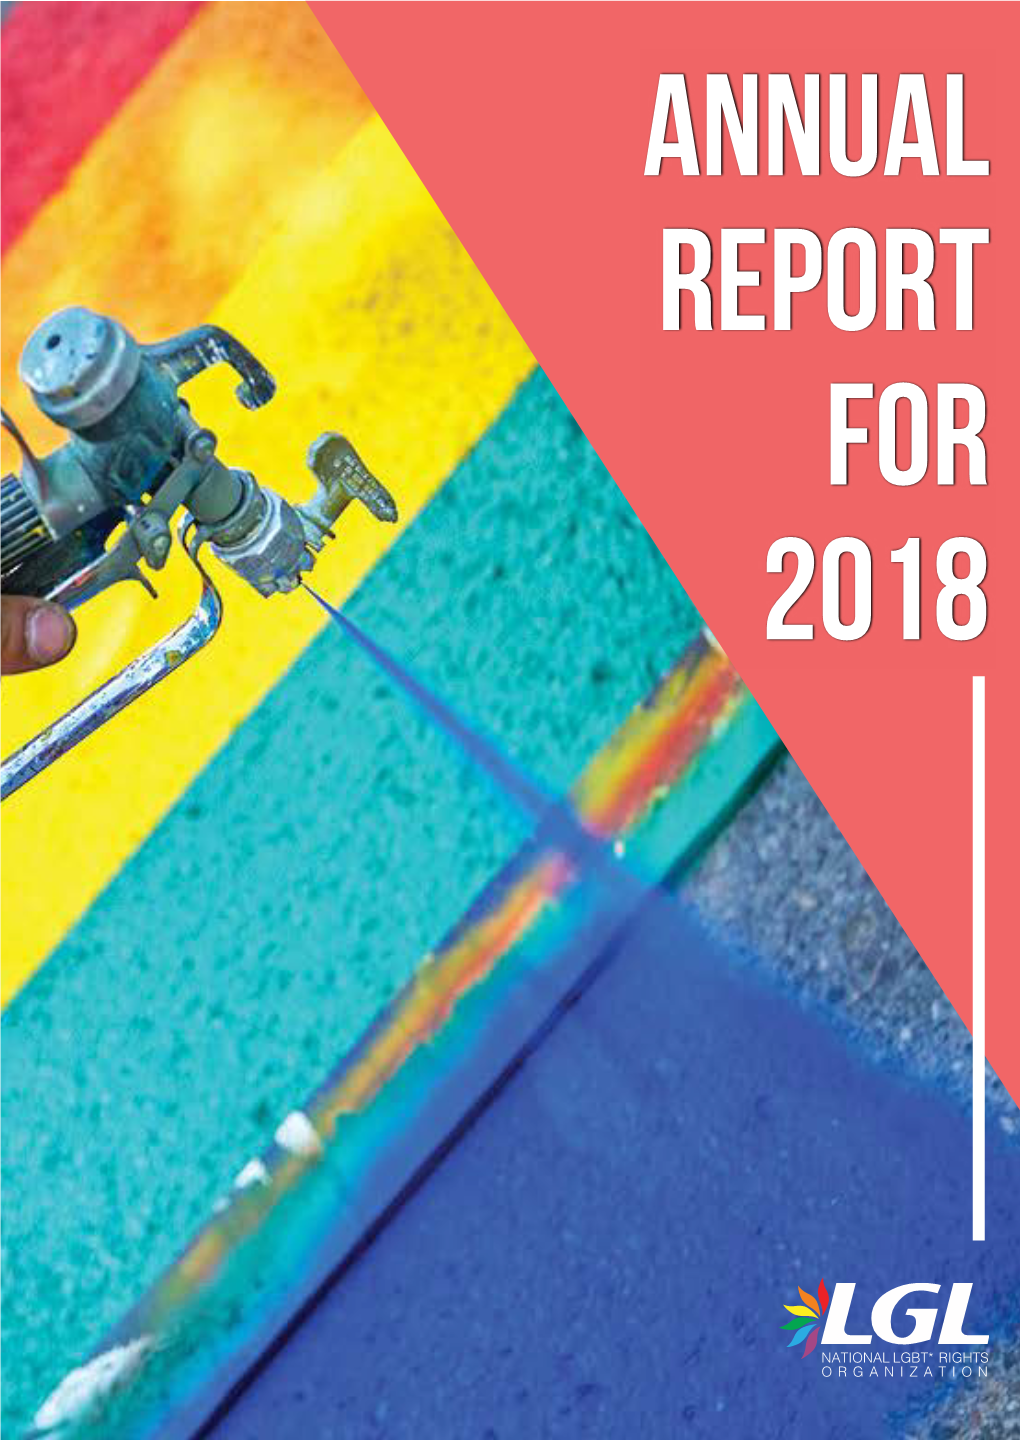 LGL Annual Report for 2018, 2019